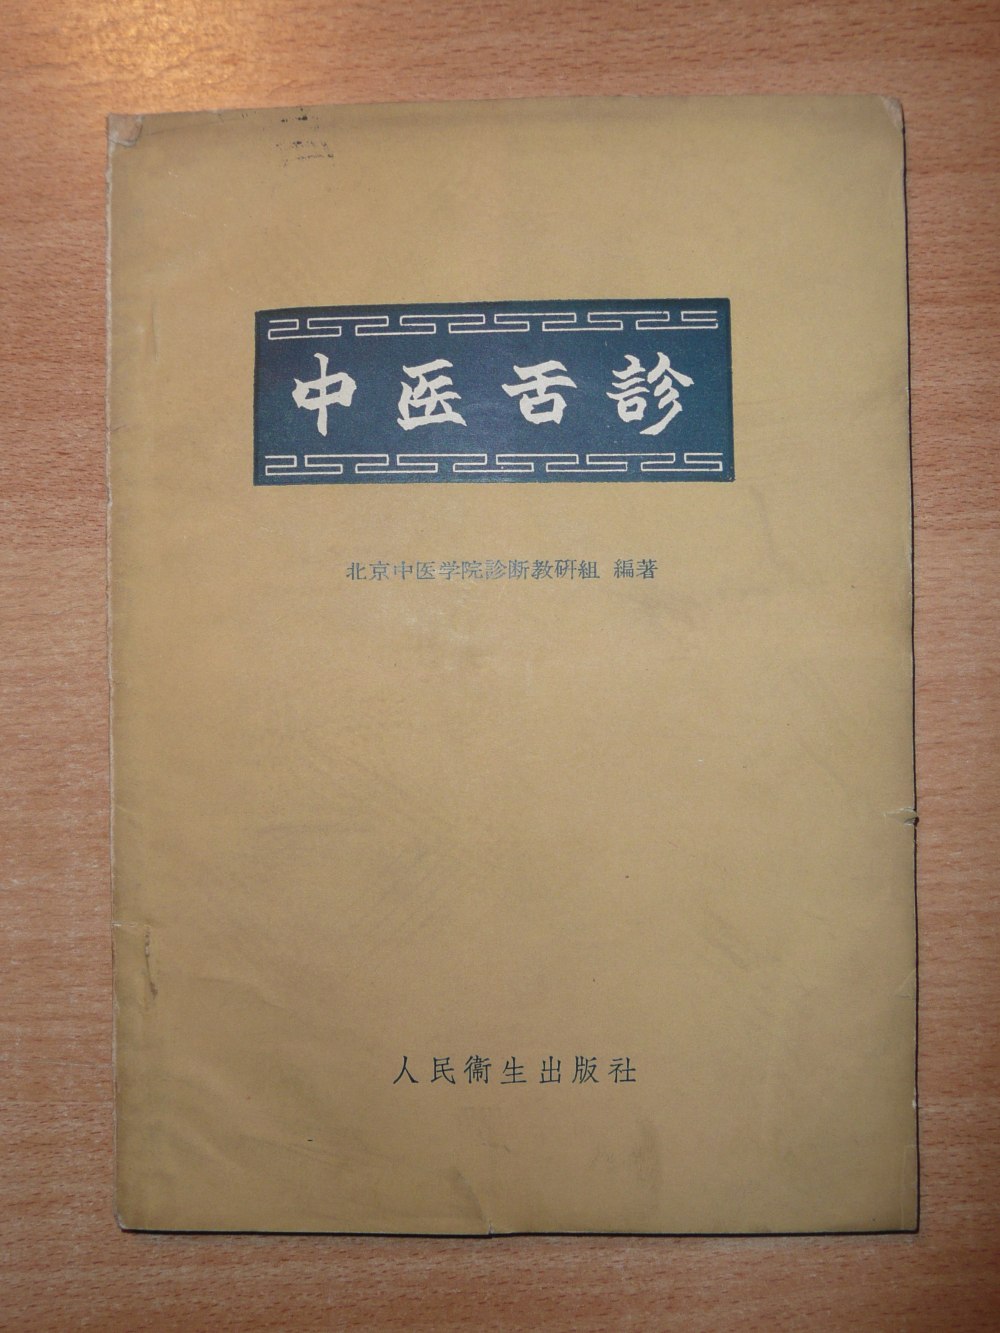 The 1960 first edition of the "Chinese Medicine Tongue Diagnosis"